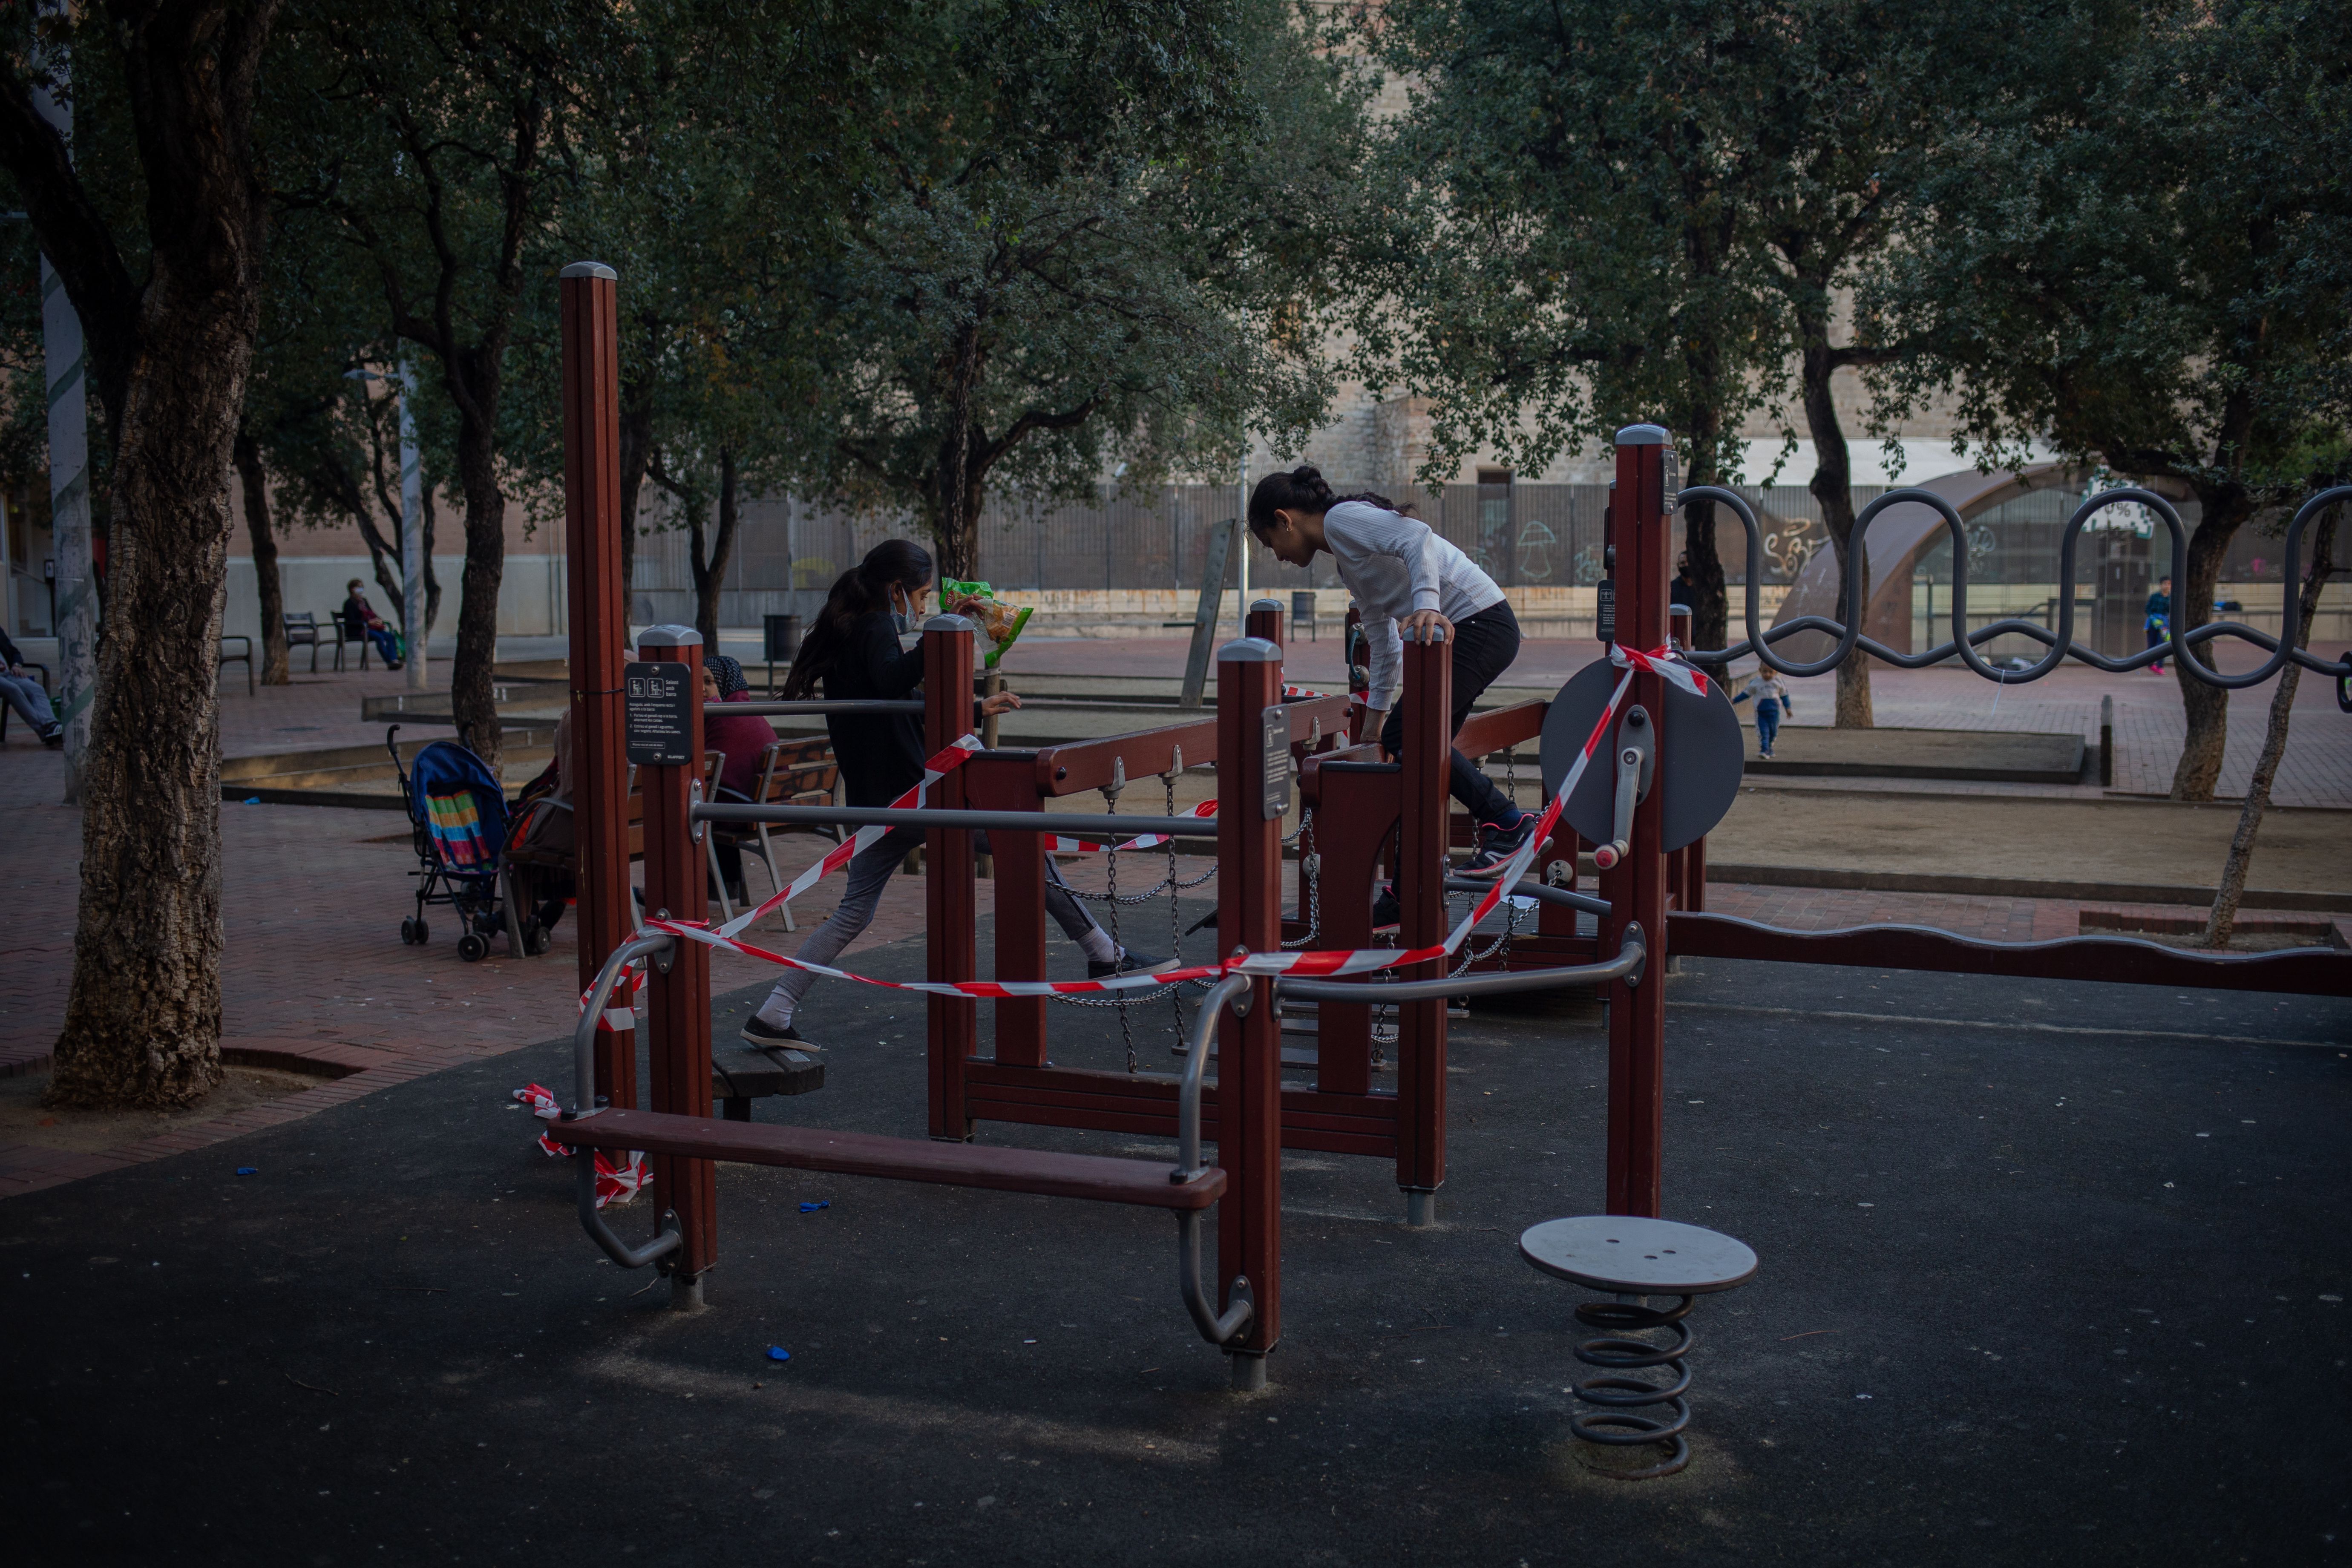 Children play in a park on October 16, 2020 in Barcelona, Spain. 